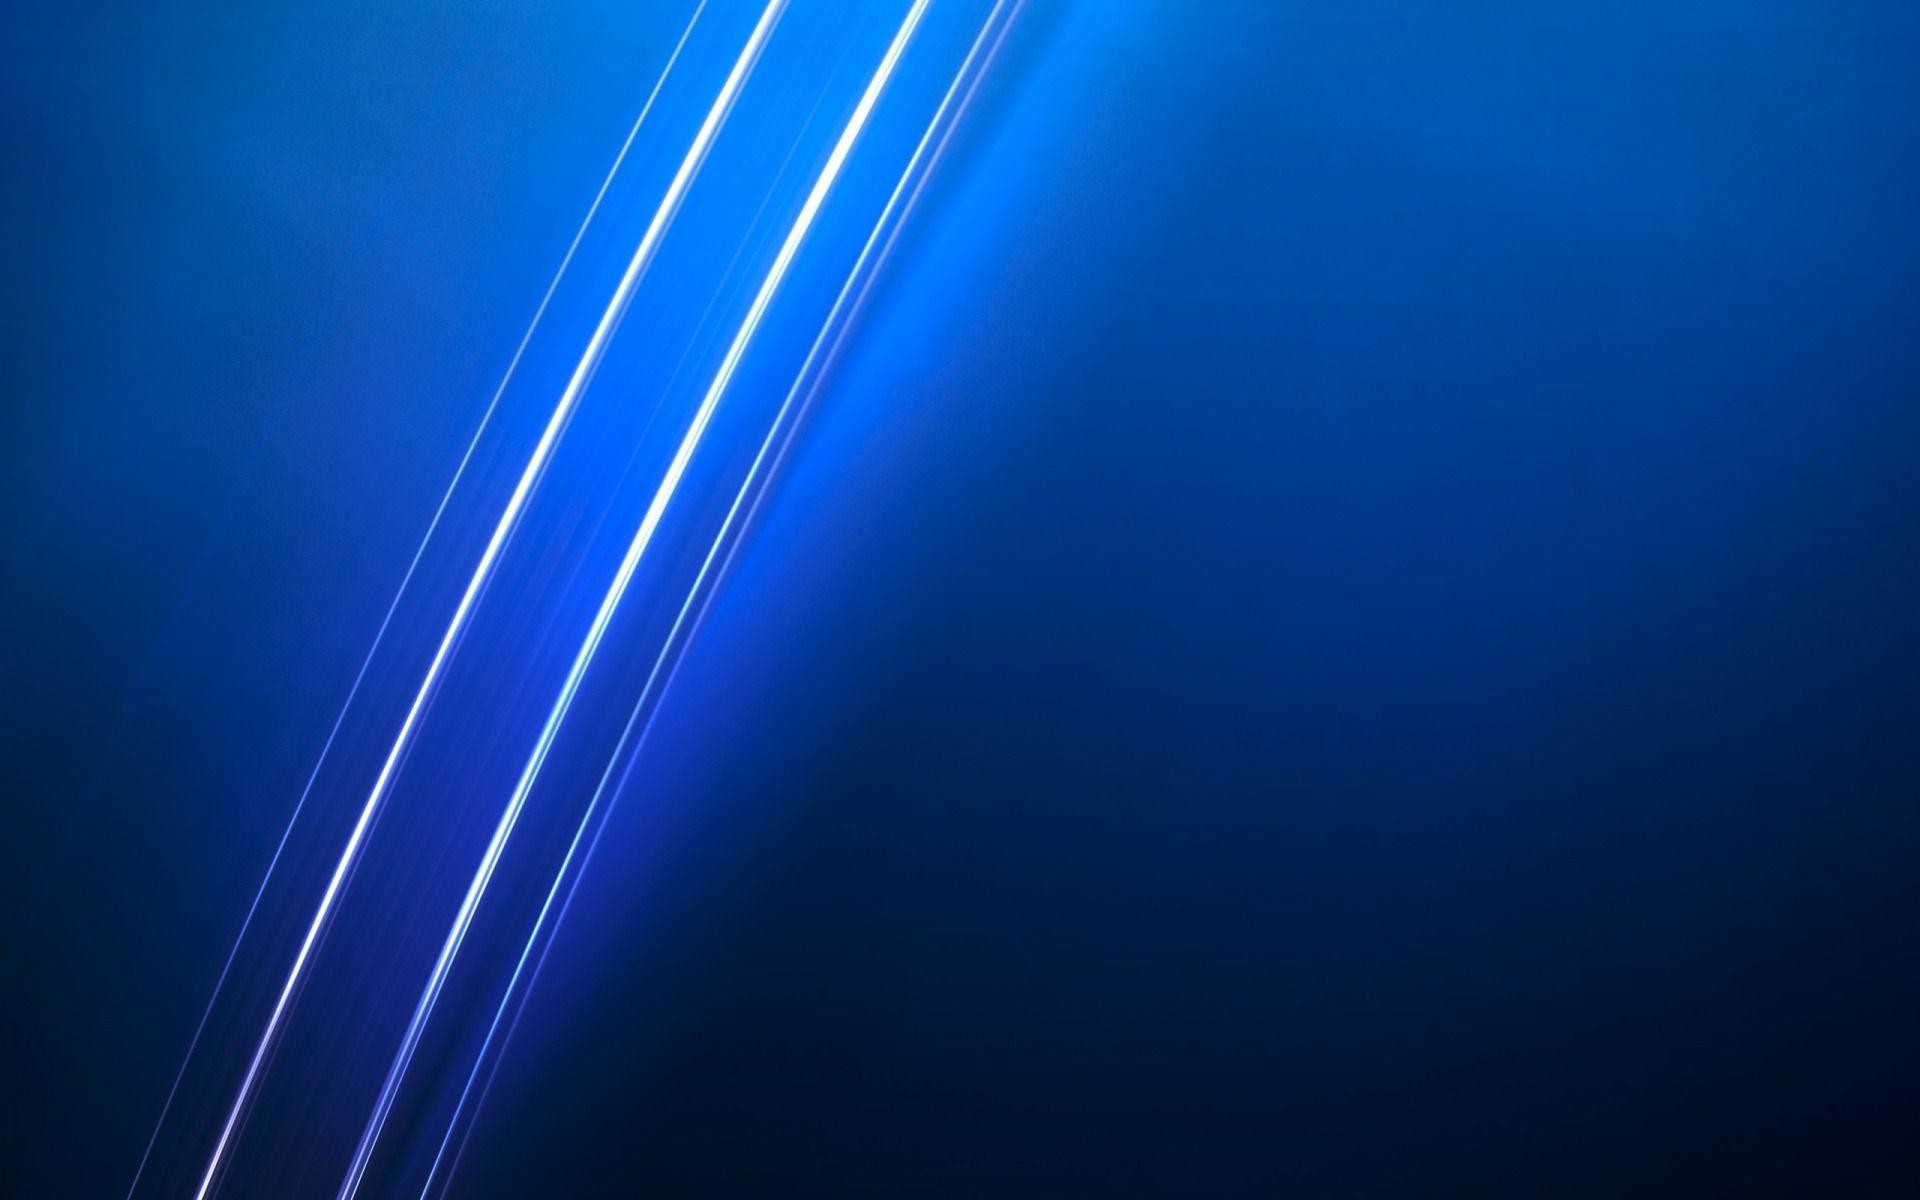 Abstract Blue Wallpaper Hd Images 3 HD Wallpapers lzamgs